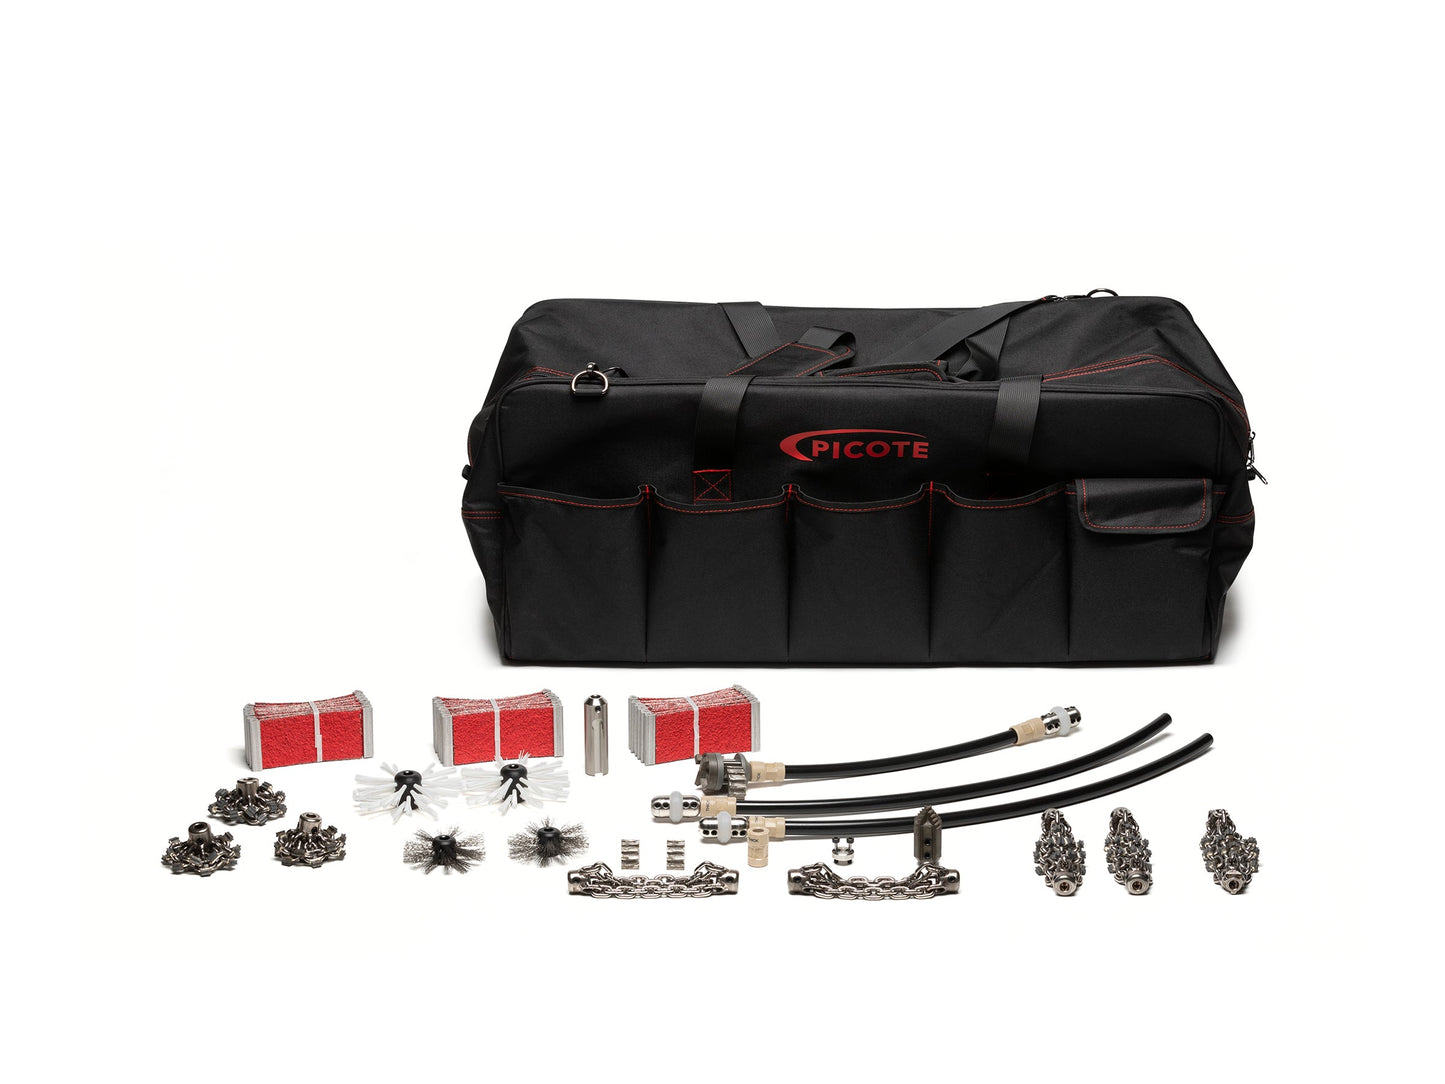 Picote Pro Drain Pipe Cleaning Kit